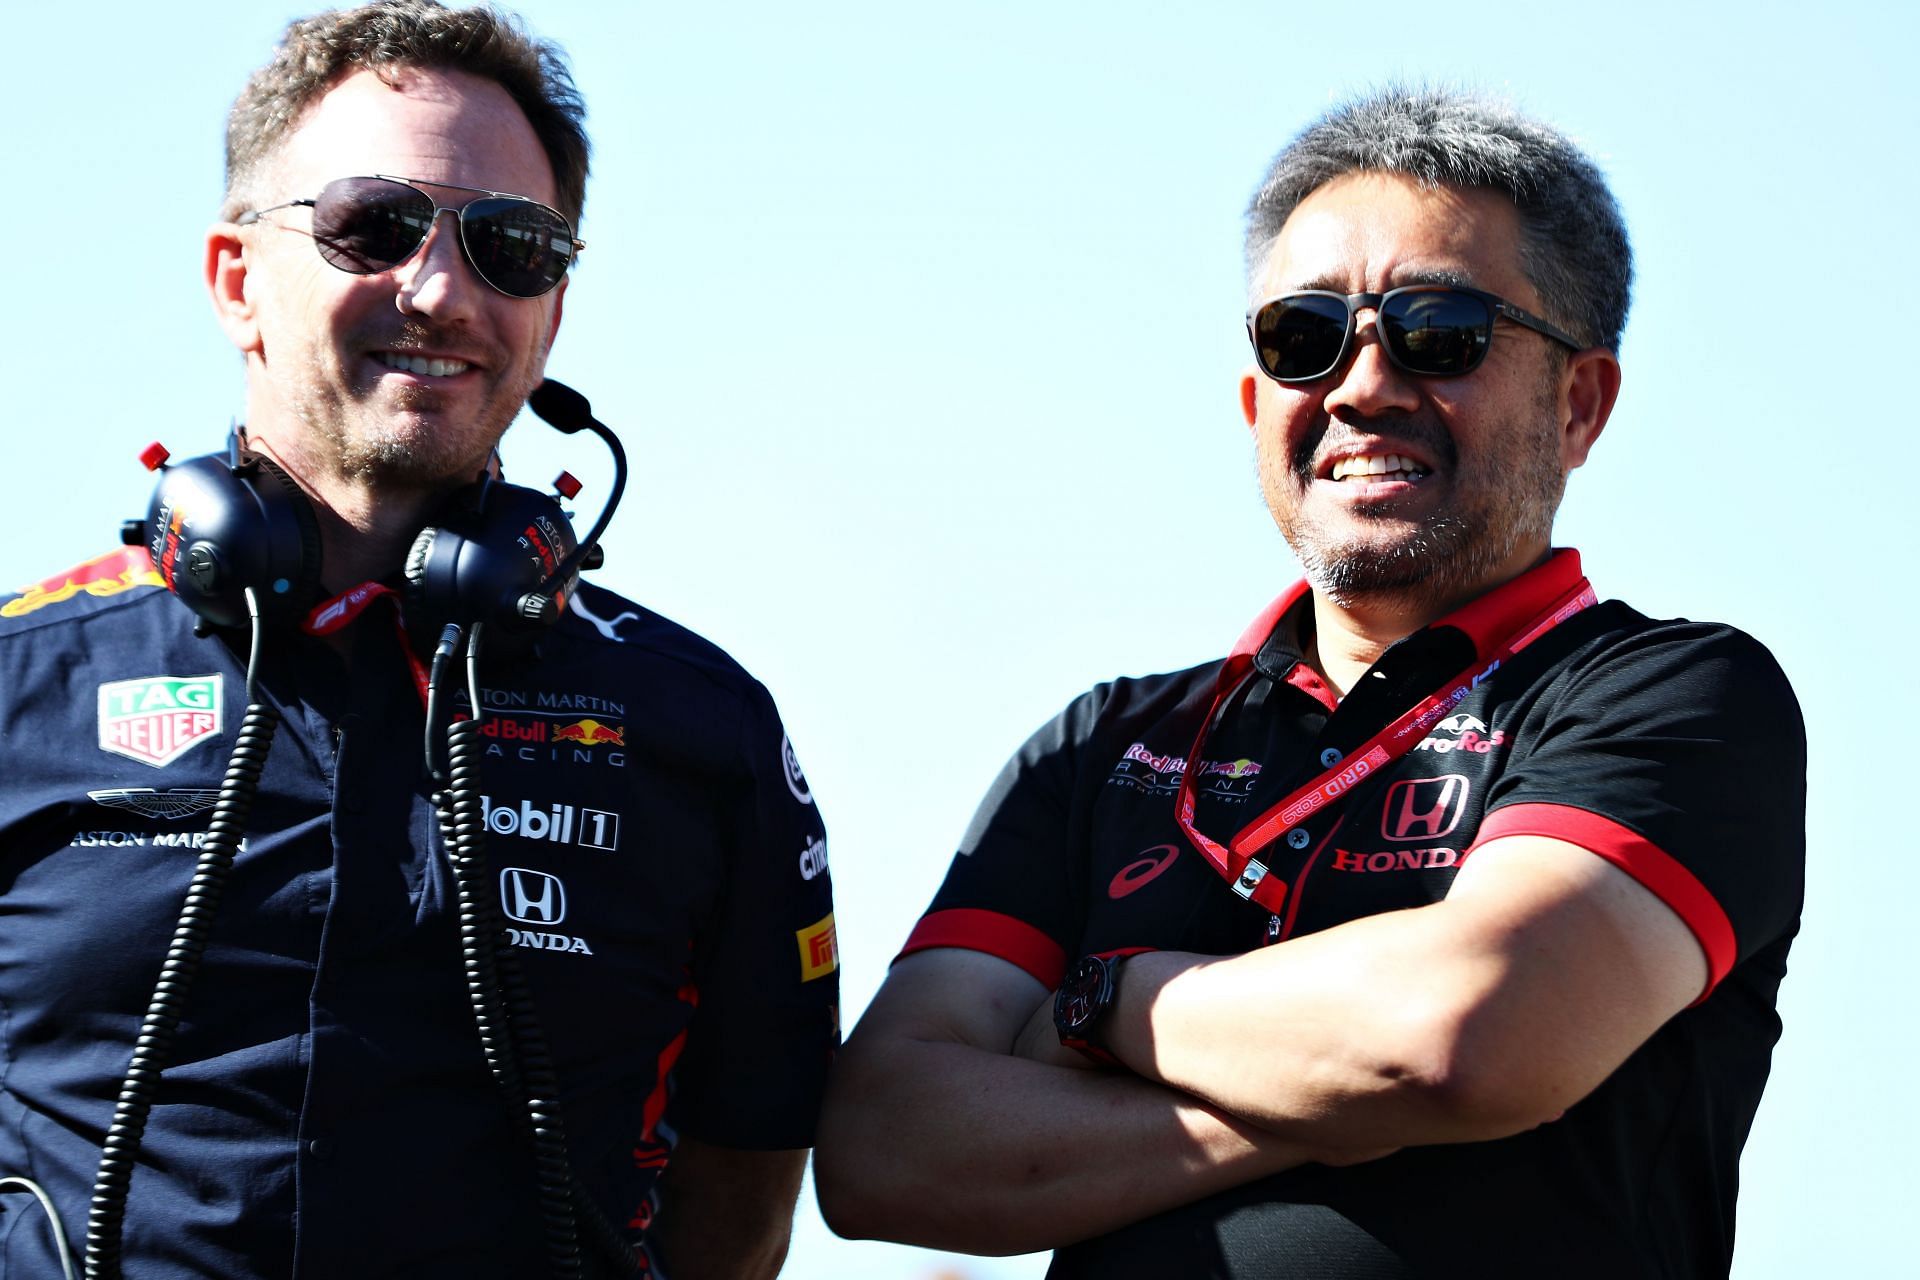 Christian Horner (left) and Masashi Yamamoto (right) on the grid in Suzuka, Japan (Photo by Mark Thompson/Getty Images)